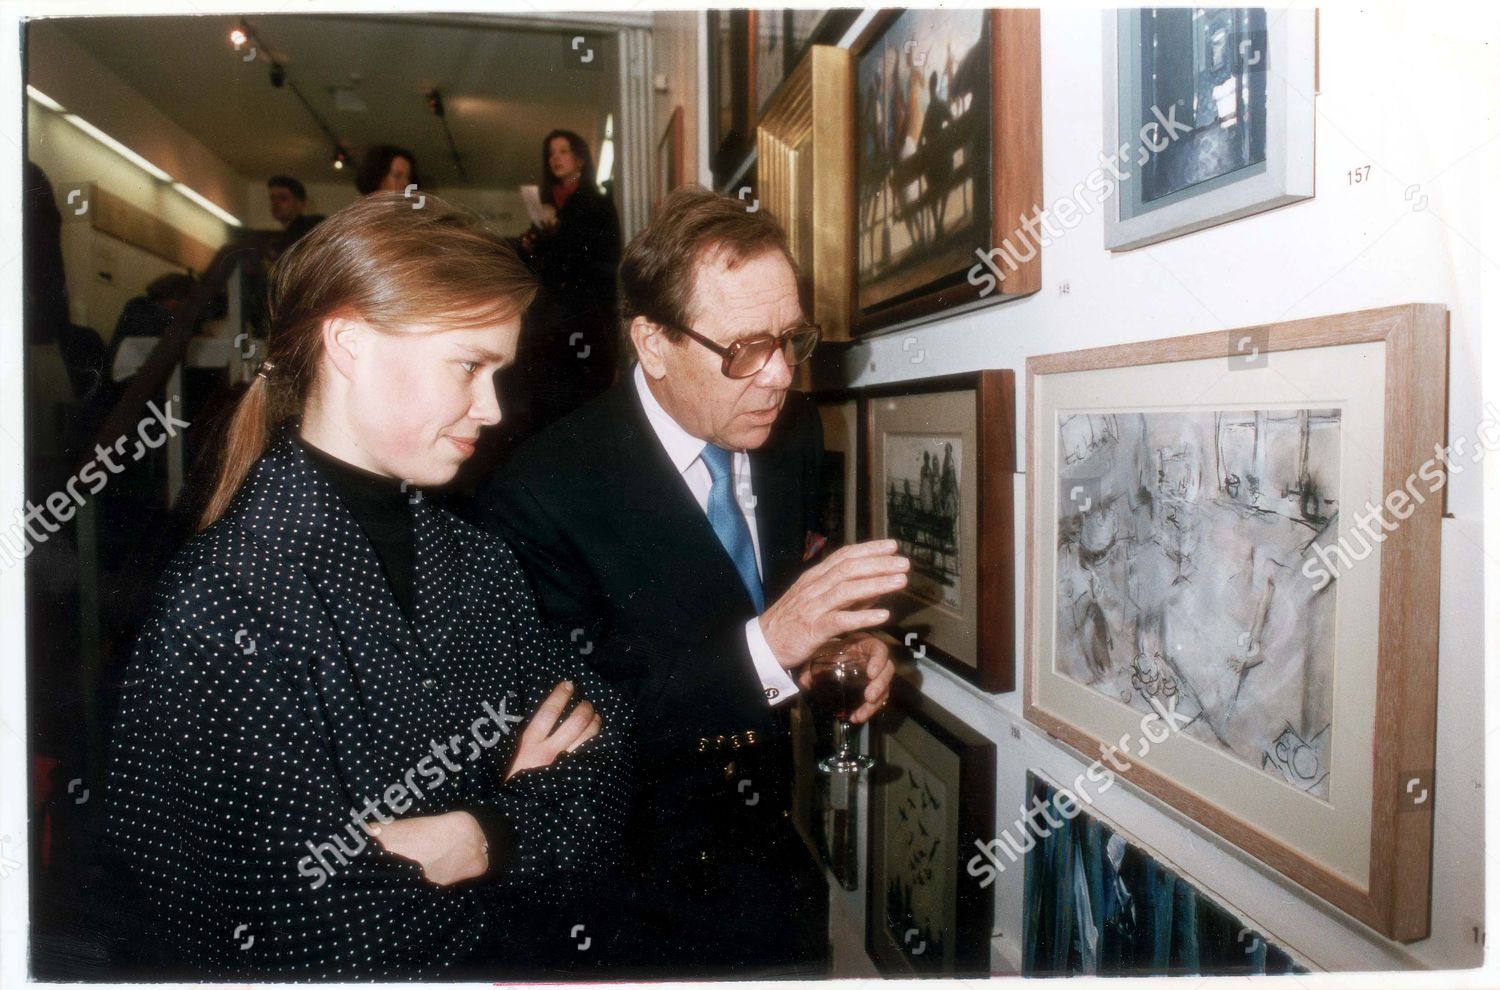 lady-sarah-armstrong-jones-now-lady-sarah-chatto-paintings-by-or-portraits-picture-shows-lord-snowdon-casting-an-approving-eye-over-paintings-by-his-daughter-lady-sarah-armstrong-jones-which-have-been-selected-for-this-years-discerning-eye-exhi-shutterstock-editorial-925491a.jpg